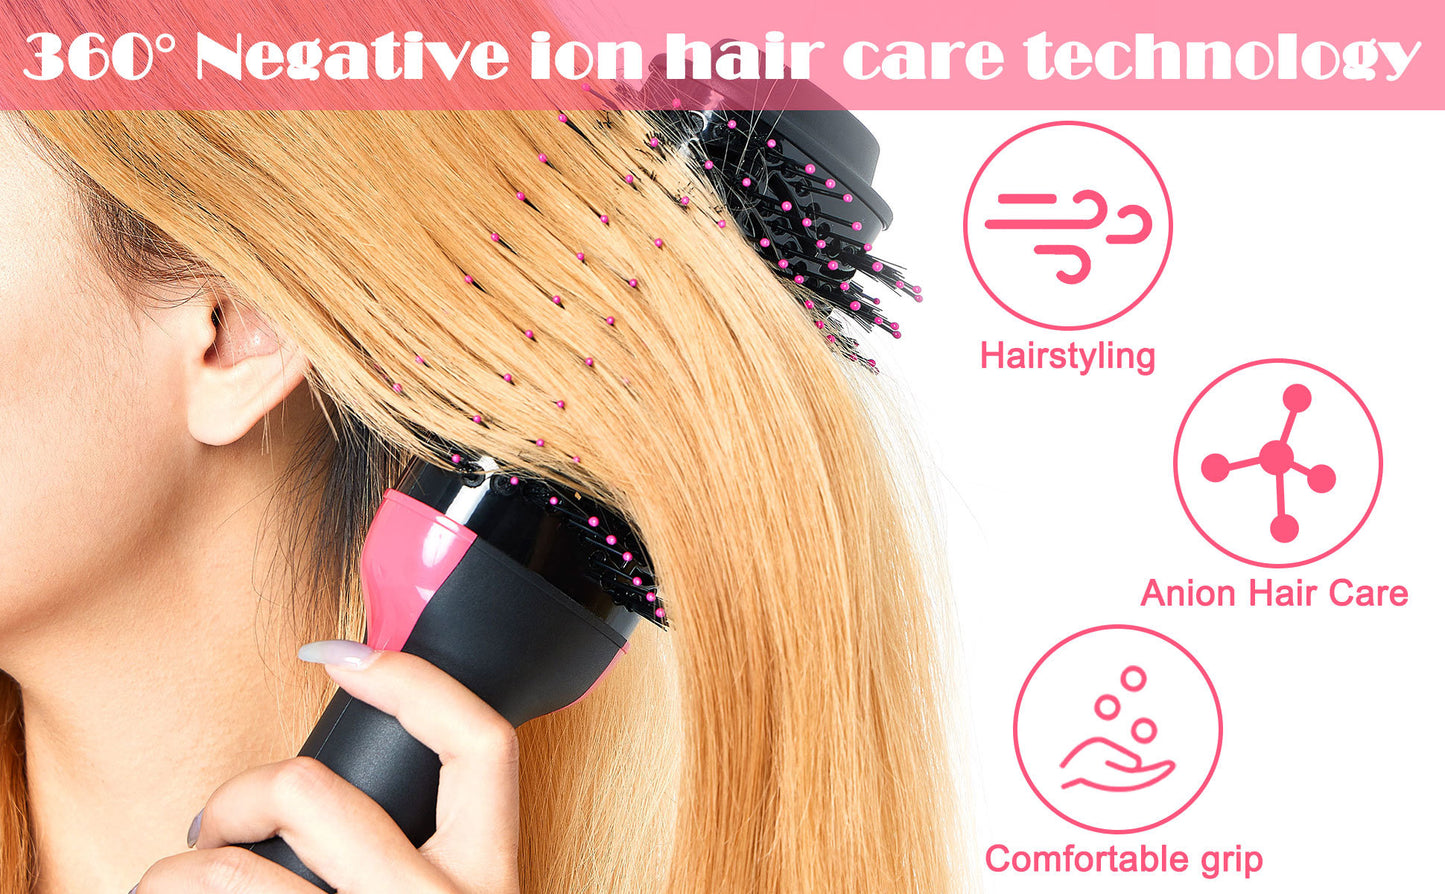 Hair Dryer Brush,Hair Volumizer for Drying & Straightening & Curling,Brush Blow Dryer Styler for Rotating Straightening, Curling, Salon Negative Ion Ceramic Dryer Brush -Amazon Restricted Products